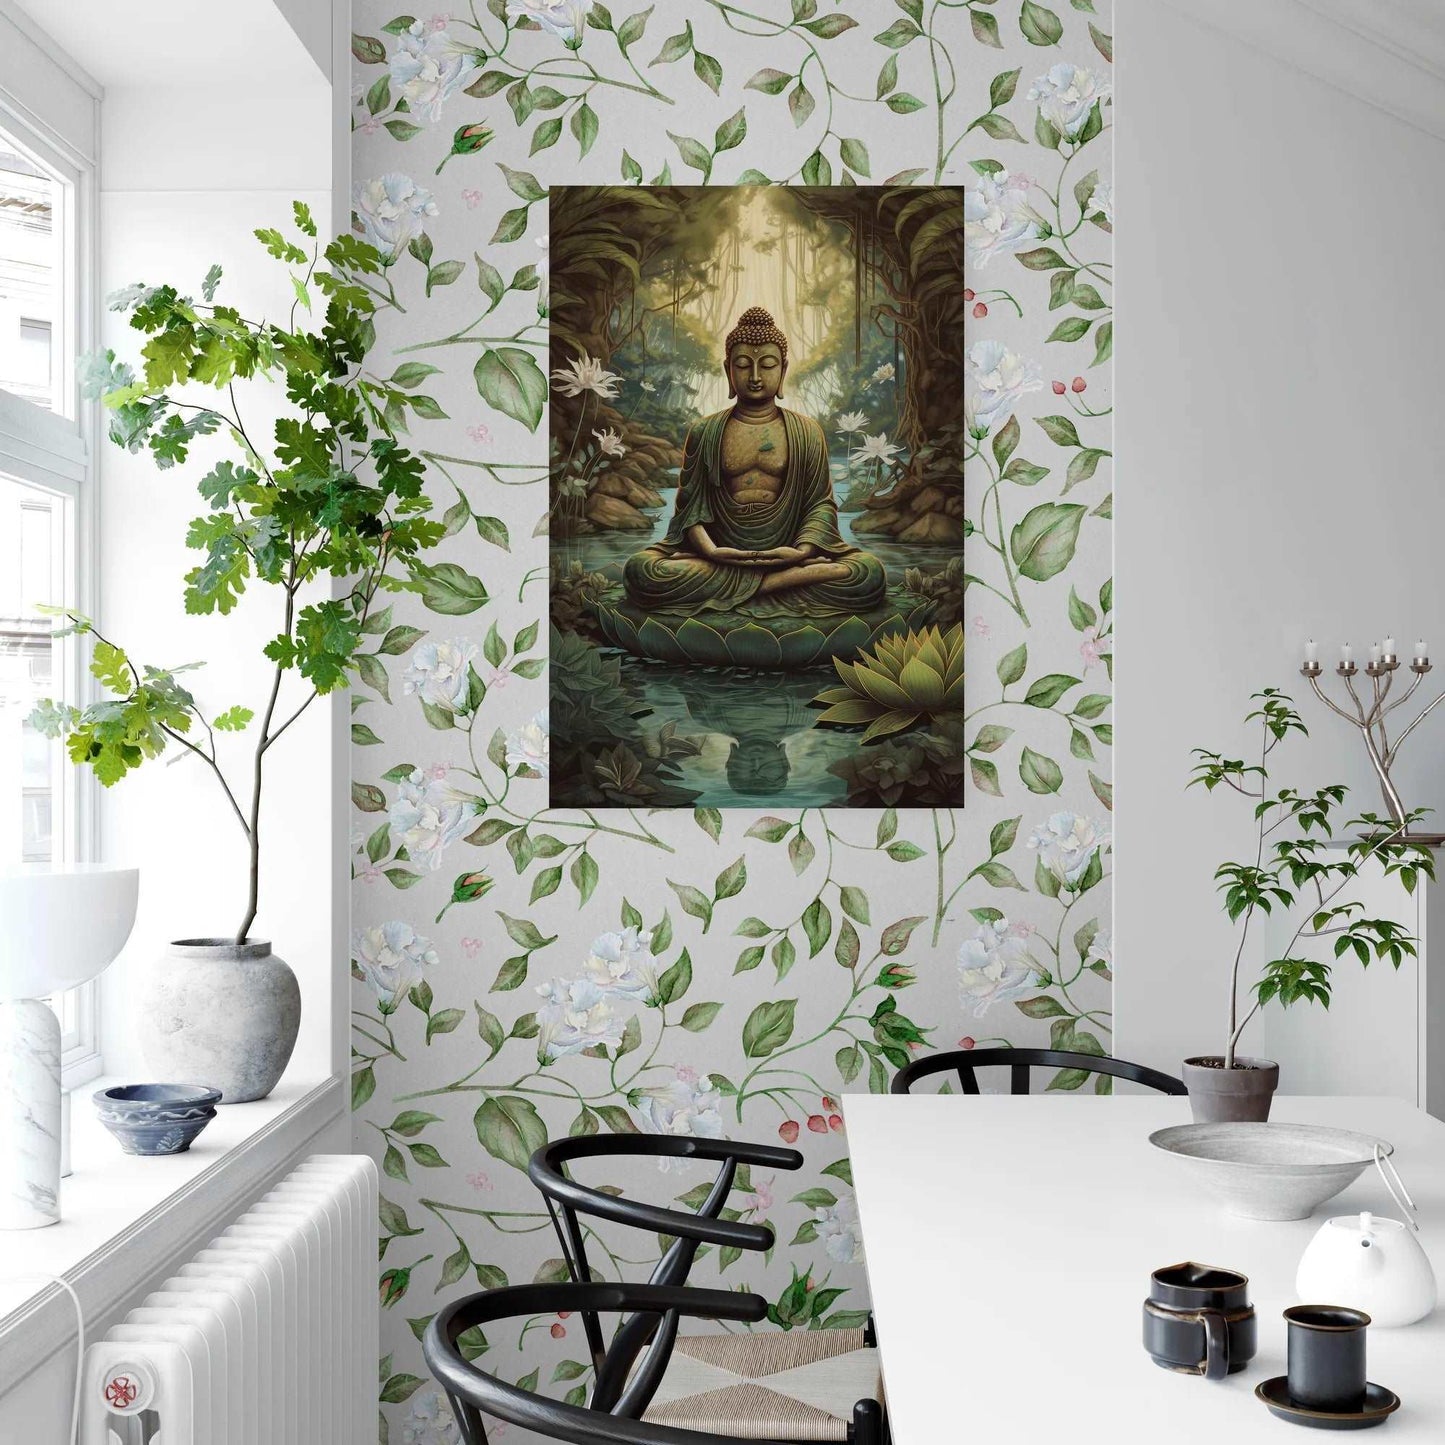 Zen Art Print Teal of Buddha in meditation, surrounded by a forest and lotus flowers, available at ZenArtBliss.com.